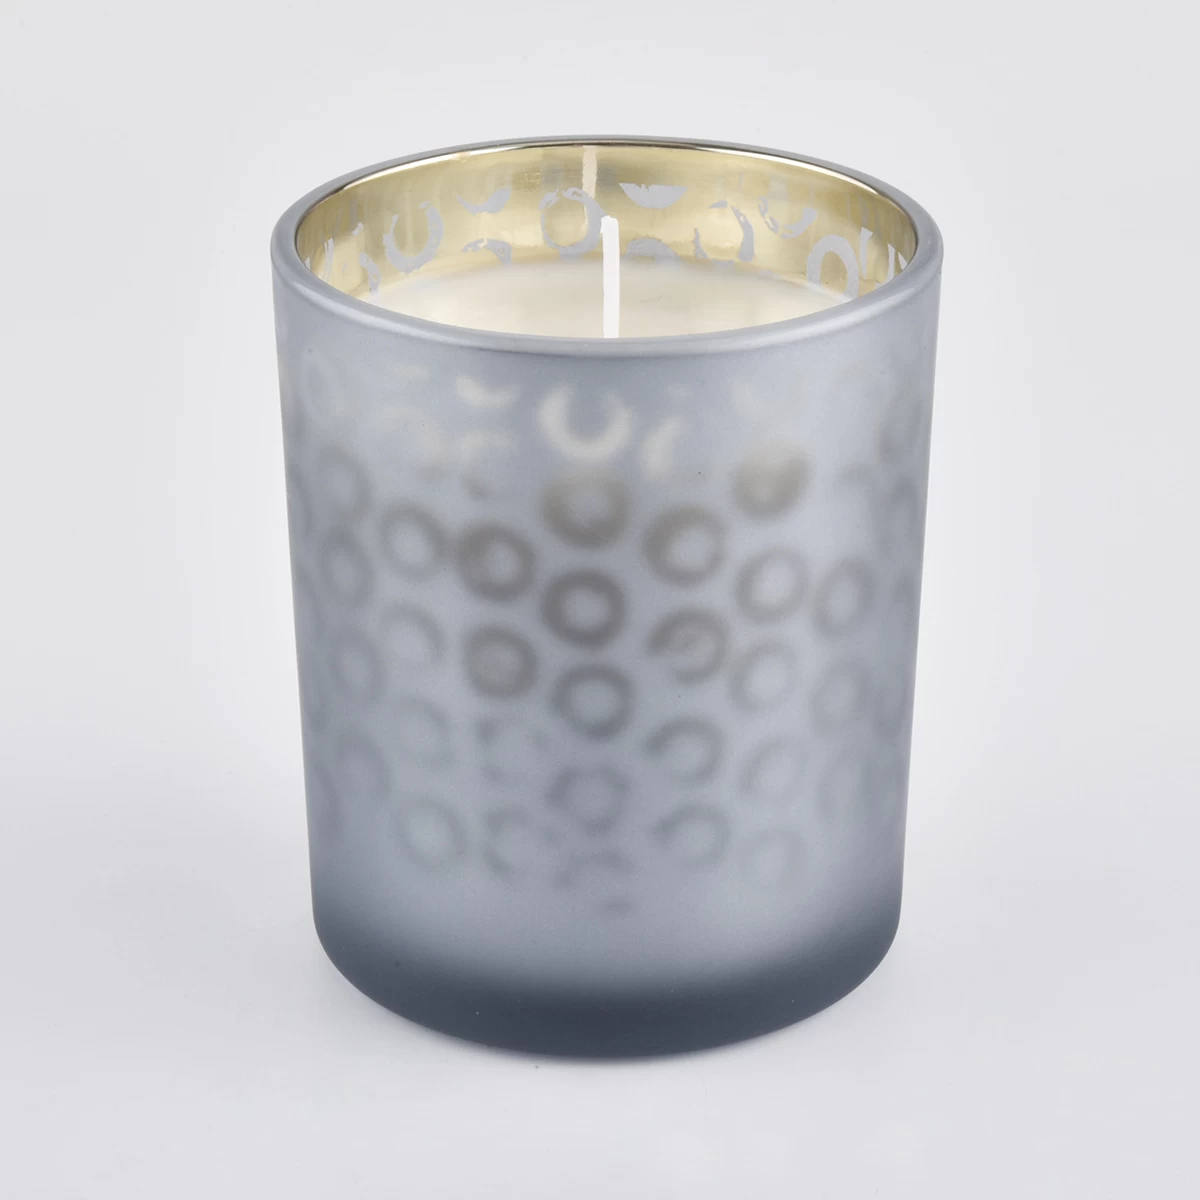 frosted glass candle jar